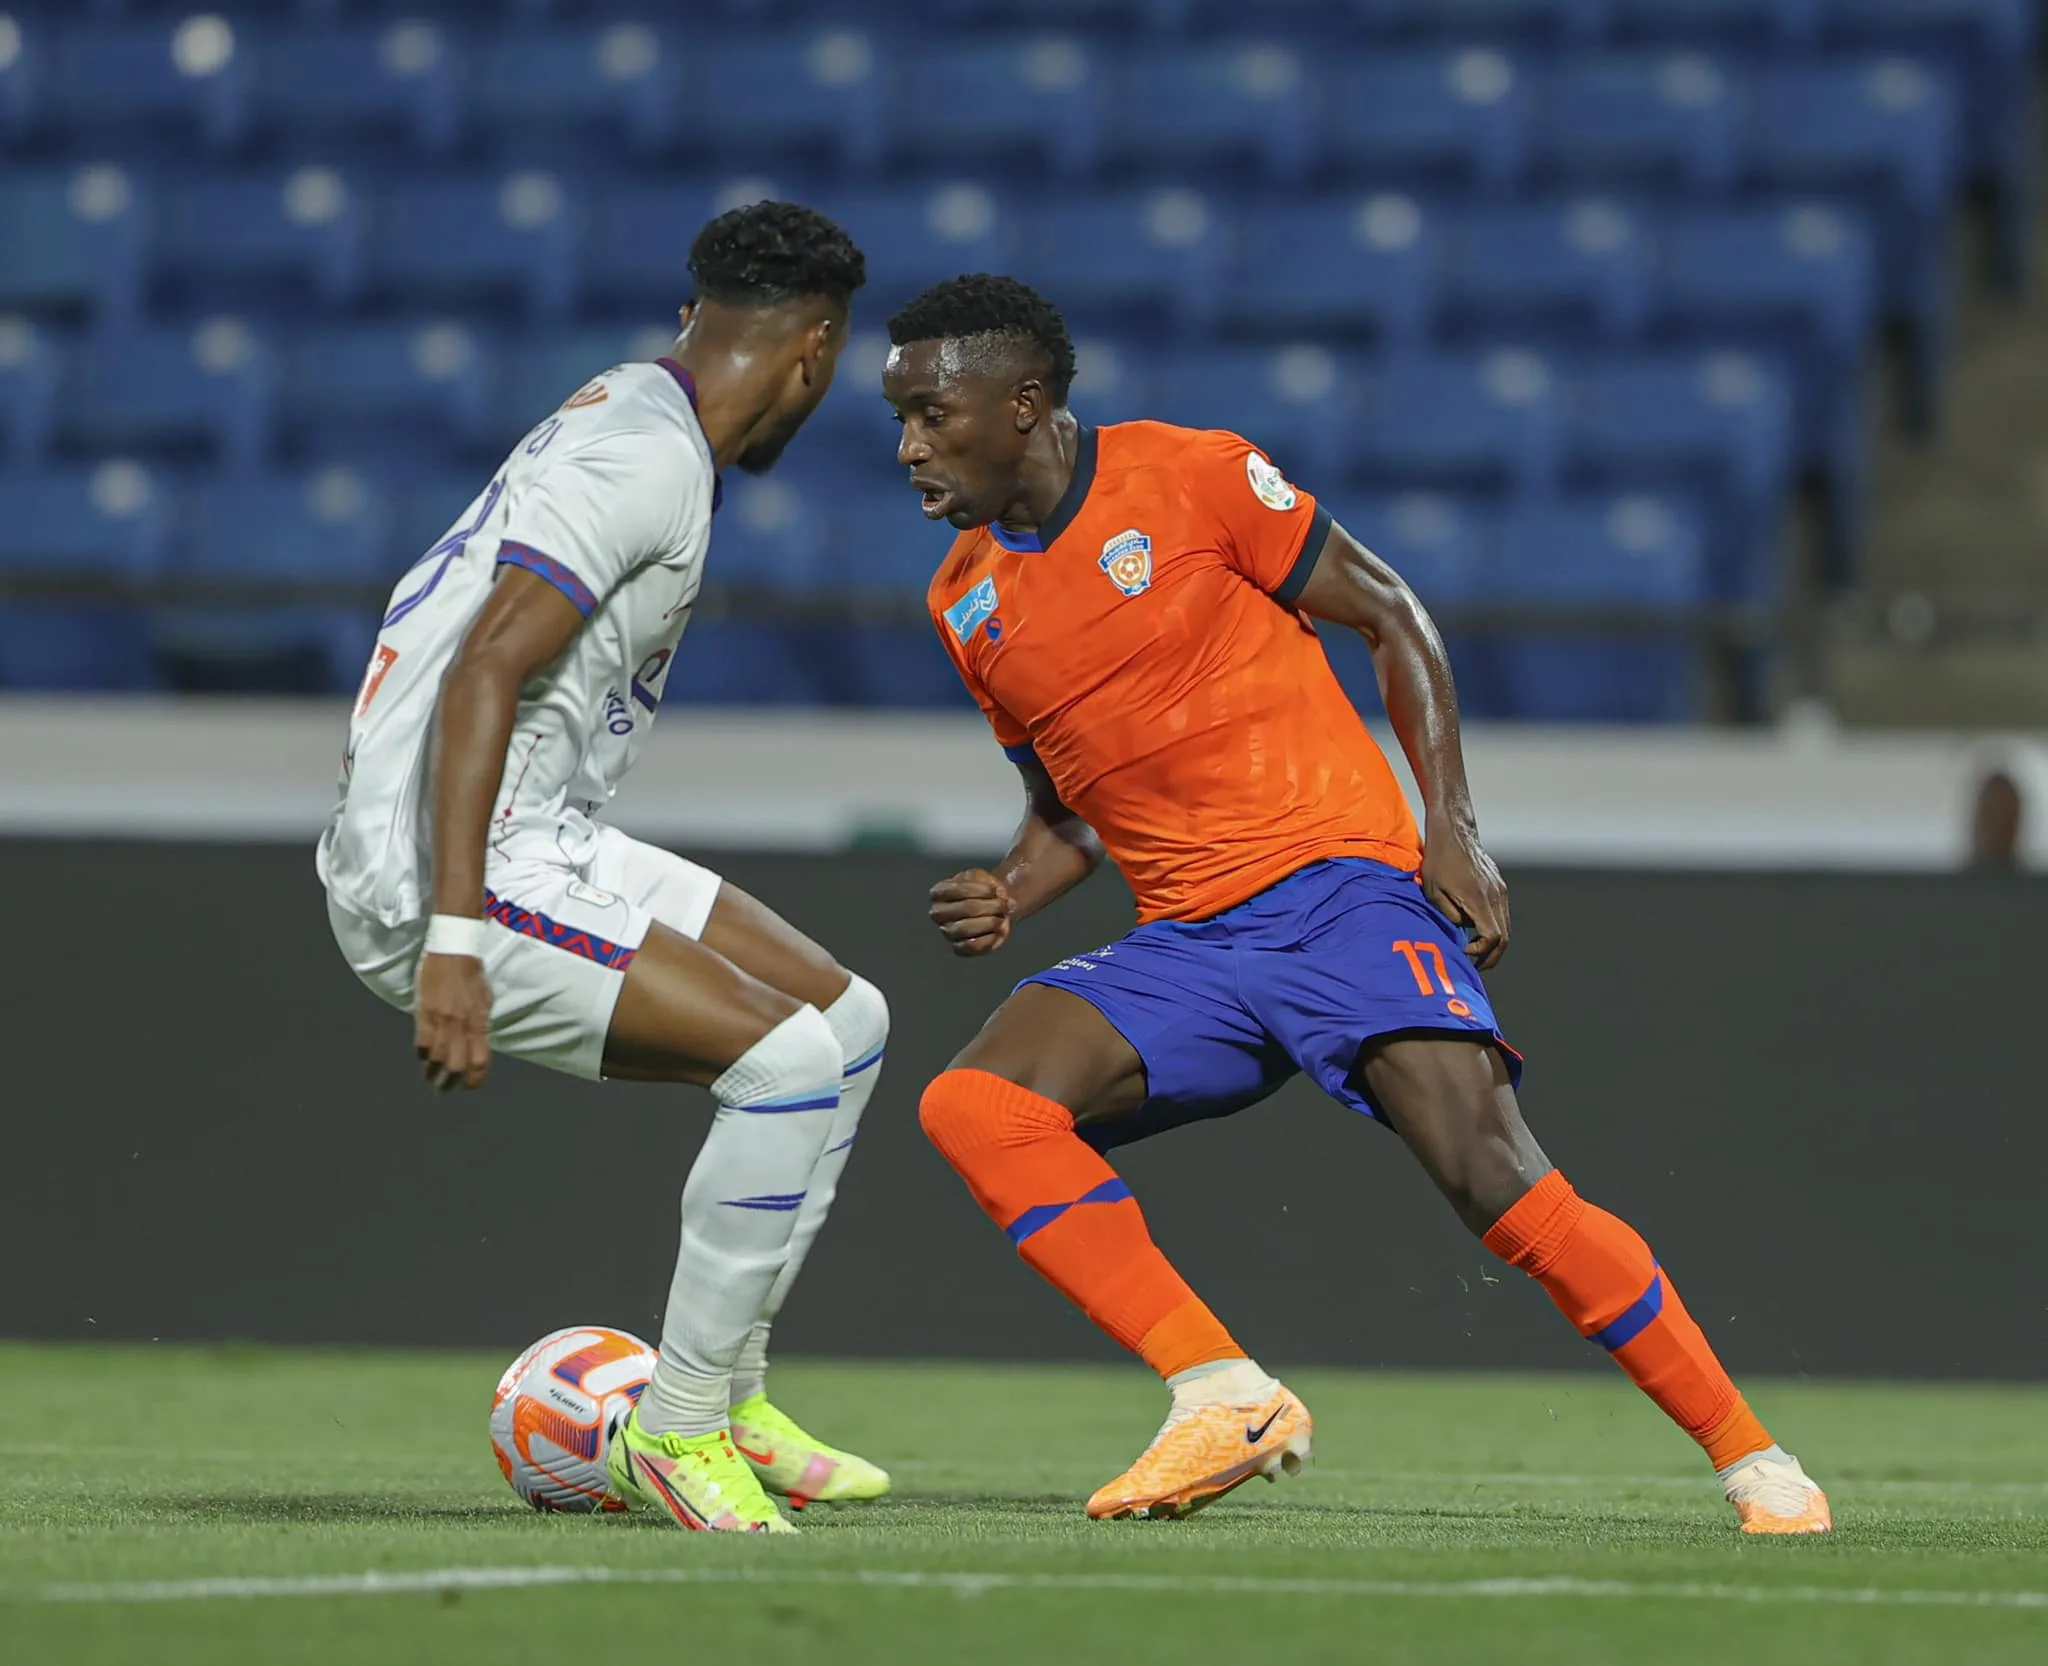 Fashion Sakala Shines in AFC Champions League: Opens Scoring Account and Provides Assist